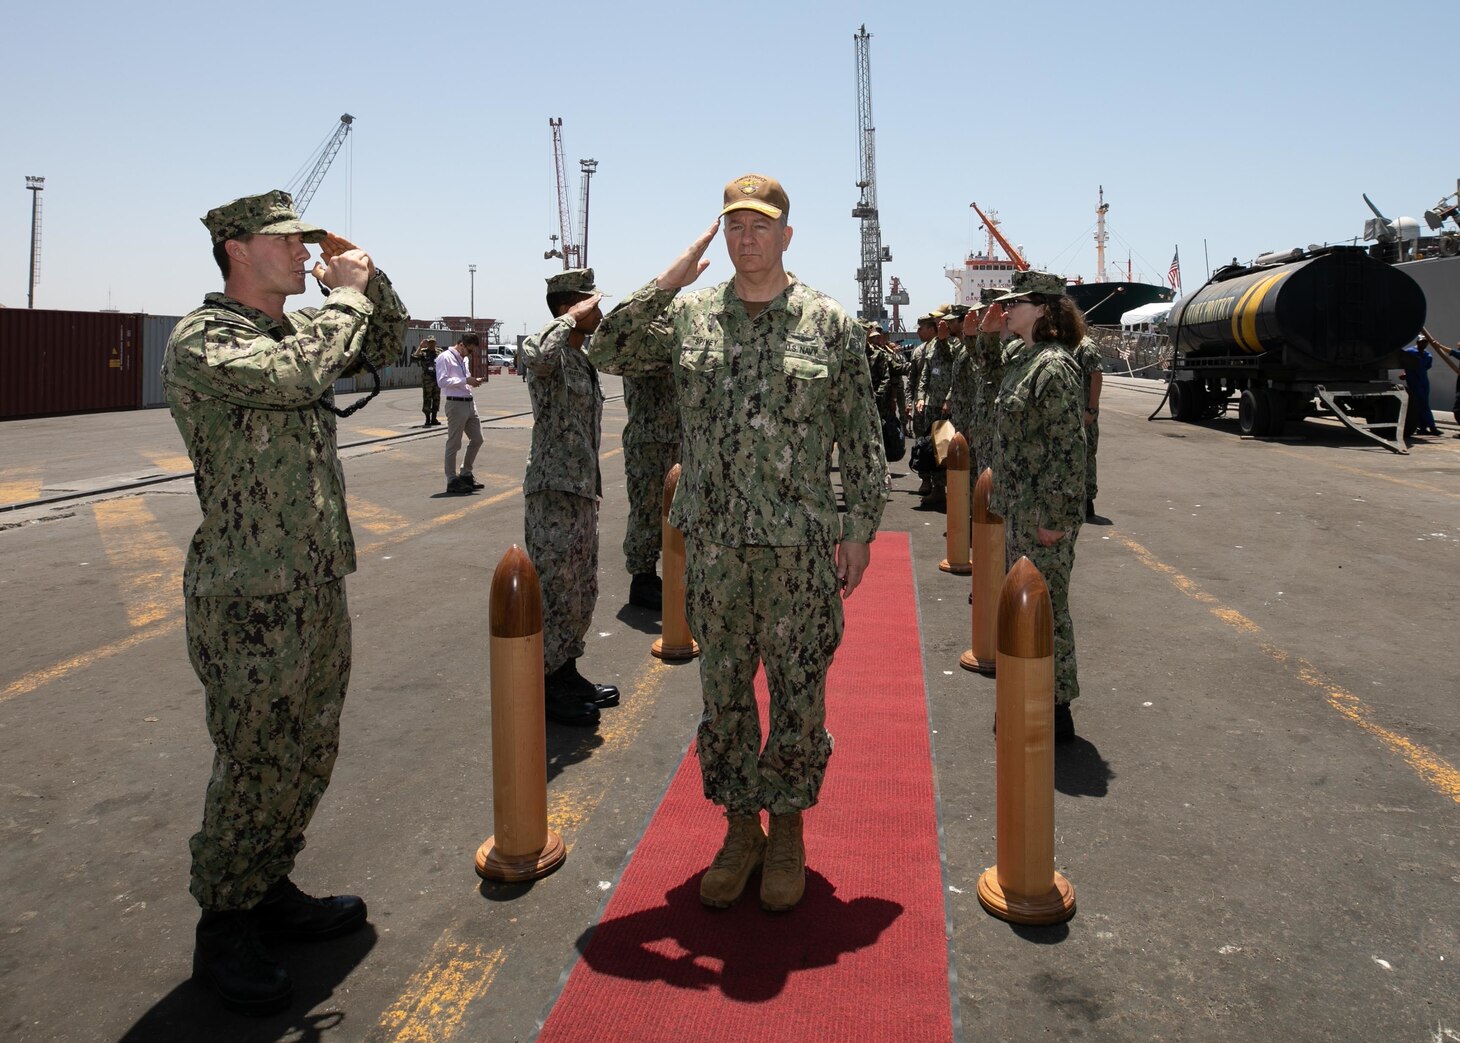 Sideboys assigned to the Arleigh Burke-class guided-missile destroyer USS Porter (DDG 78), welcome aboard Rear Adm. Jeffery Spivey, vice commander of U.S. Sixth Fleet, during exercise African Lion 22, June 28, 2022.